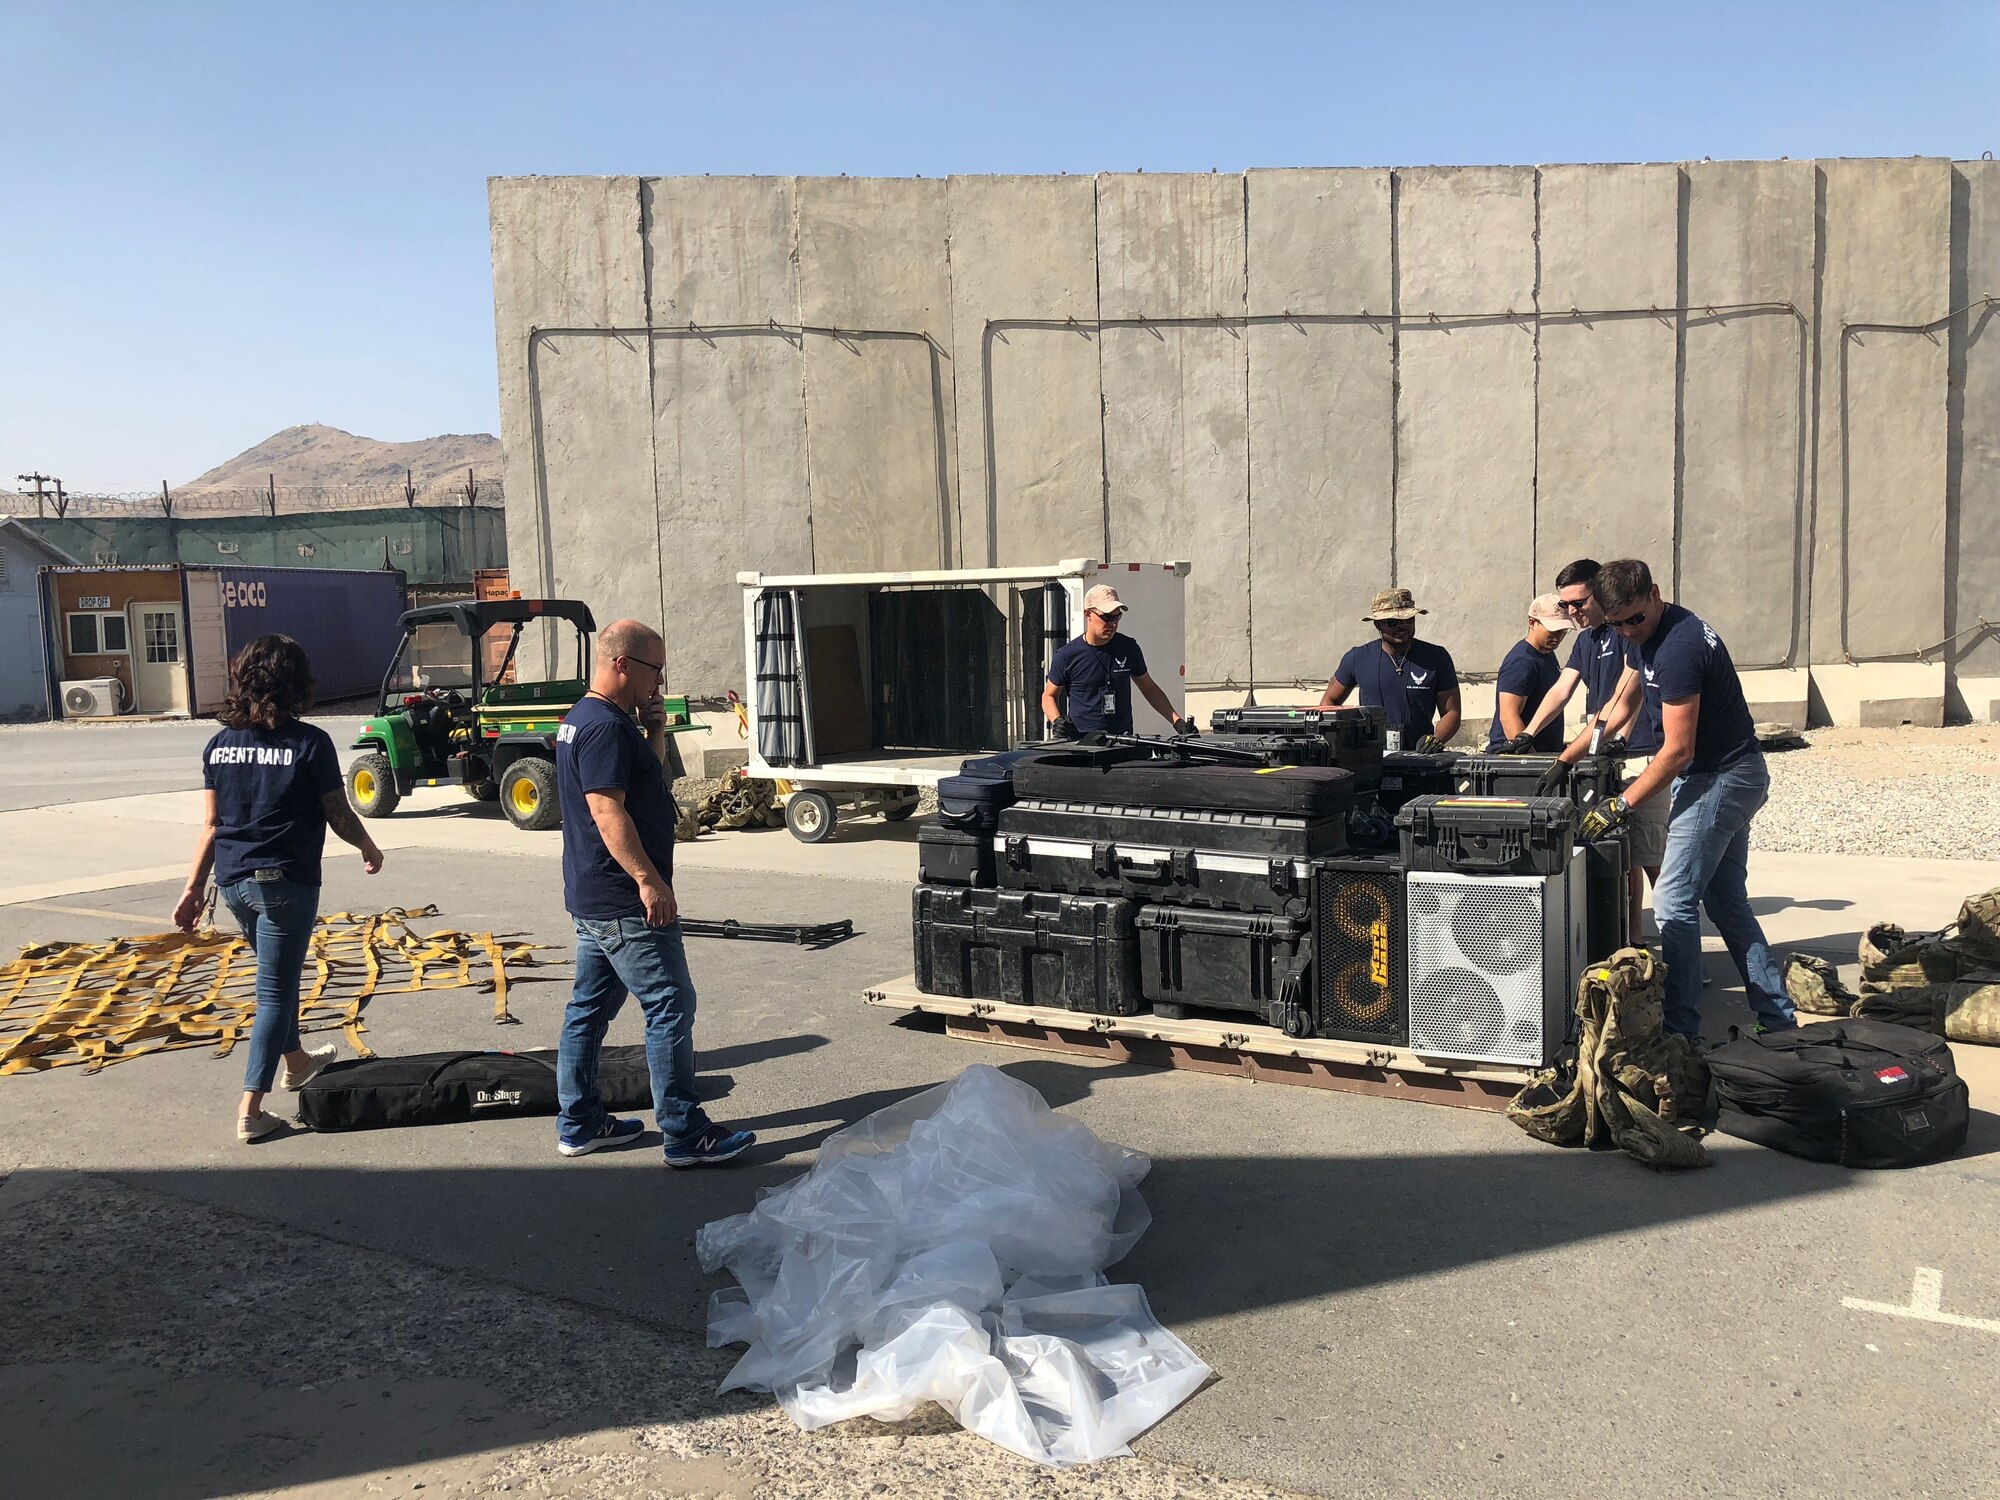 Members of the U.S. Air Forces Central Command Band stack their music equipment on a pallet at Kabul, Afghanistan Sept. 17, 2018. The band has to build to the strict requirements of Logistics, Readiness and Services standards, preparing their gear for transit on Air Force aircraft. In addition to performing, band members are responsible to load and transport their equipment. (U.S. Air Force photo by Capt. Dustin Doyle)